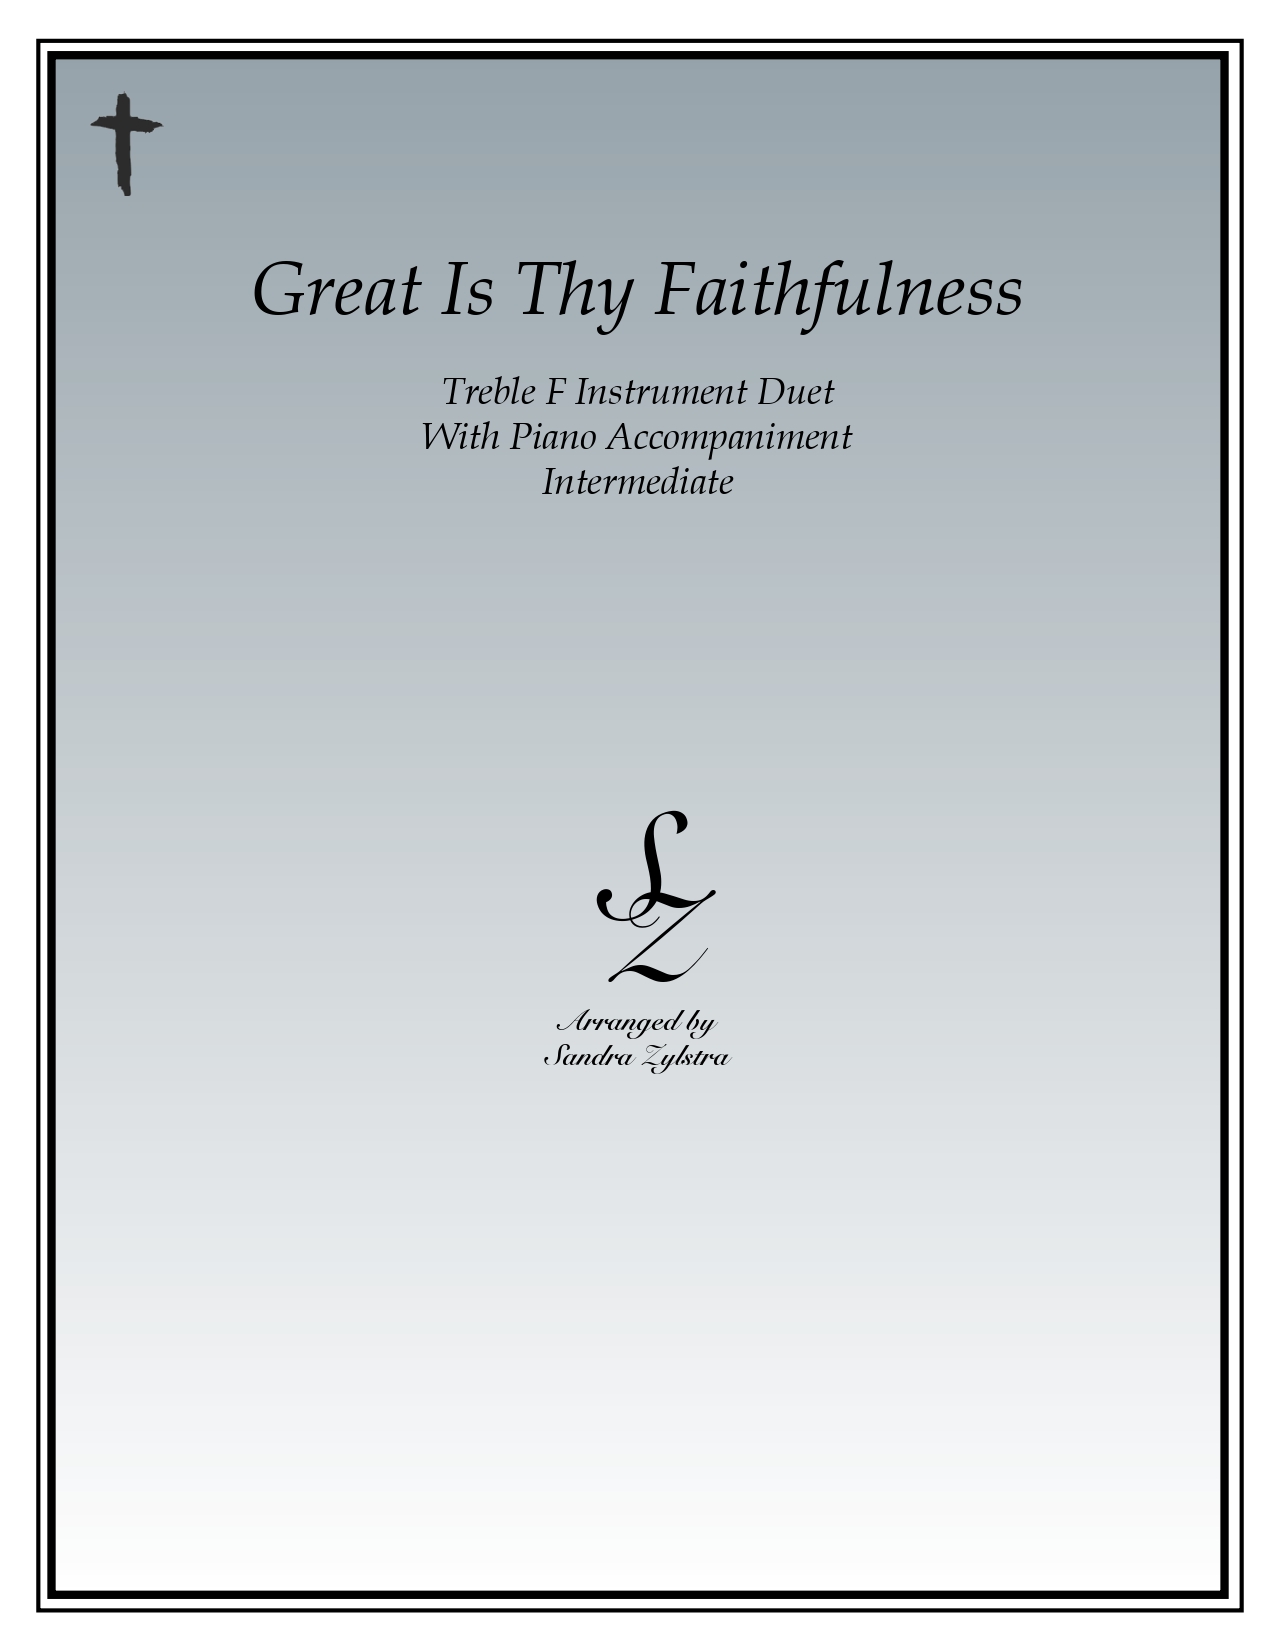 Great Is Thy Faithfulness F instrument duet parts cover page 00011